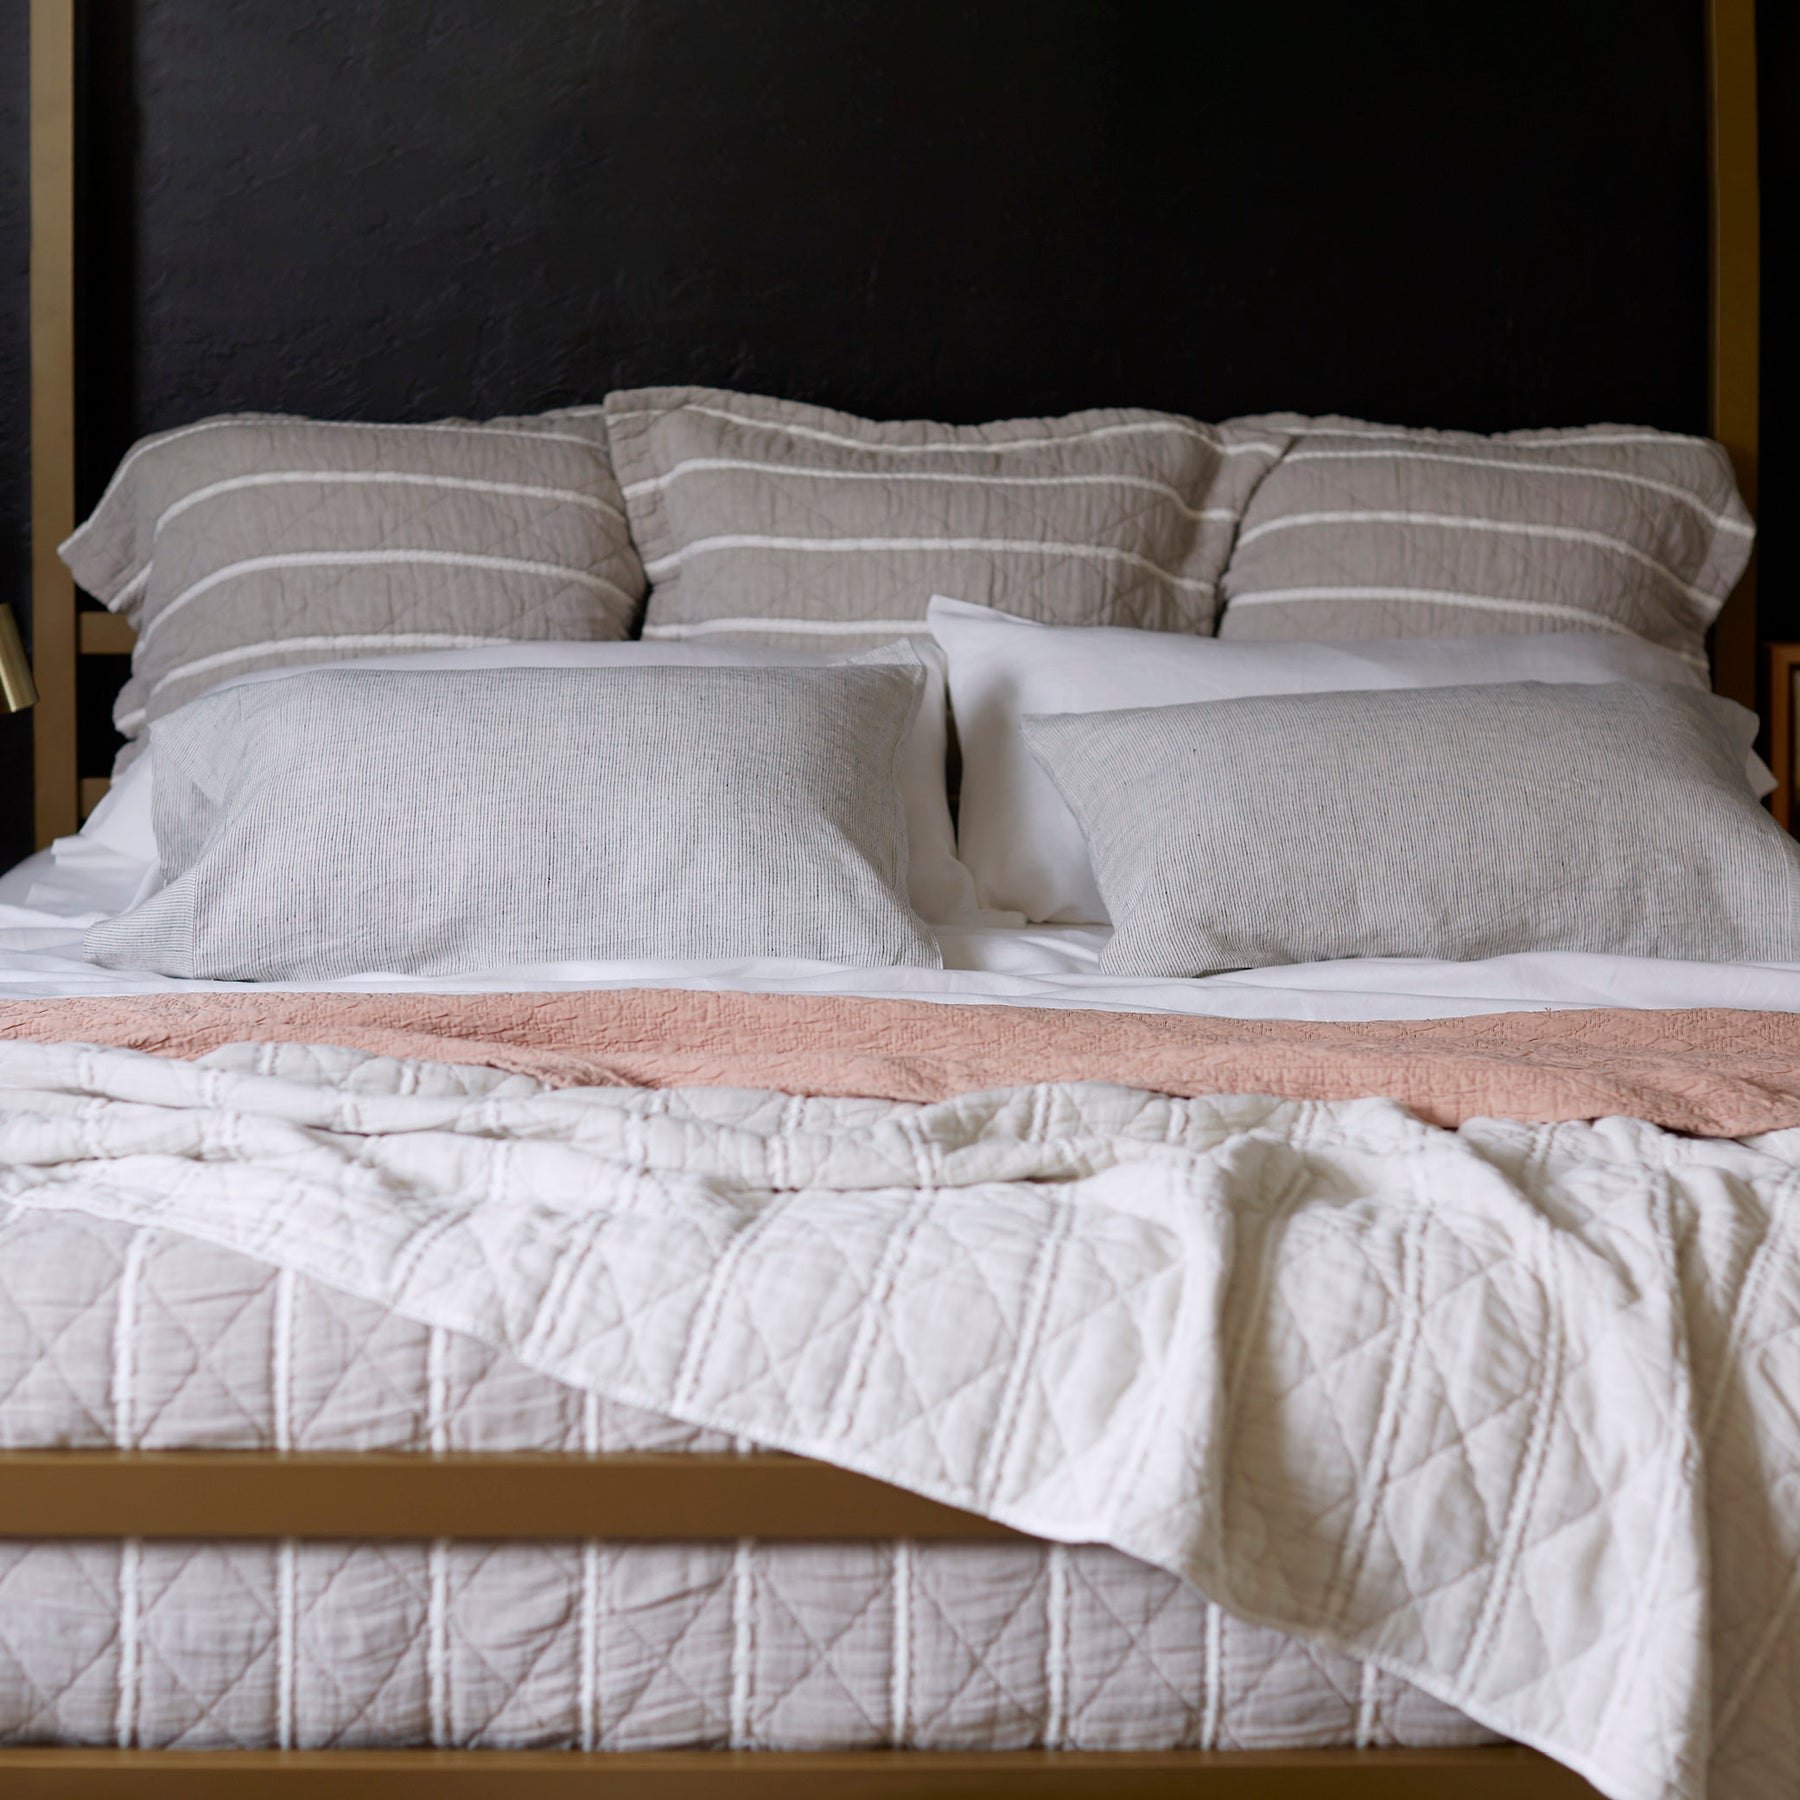 Image of a made bed with a dark background. The bed showcases pillows of various sizes and layered bedding. Items on the bed include: White Blended Linen Sheets, Pinstripe Relaxed Hemp Pillowcases, a Pink Sandstone Wave Coverlet, and a reversible gray and white striped Heritage Quilt and Euro Pillow Shams.